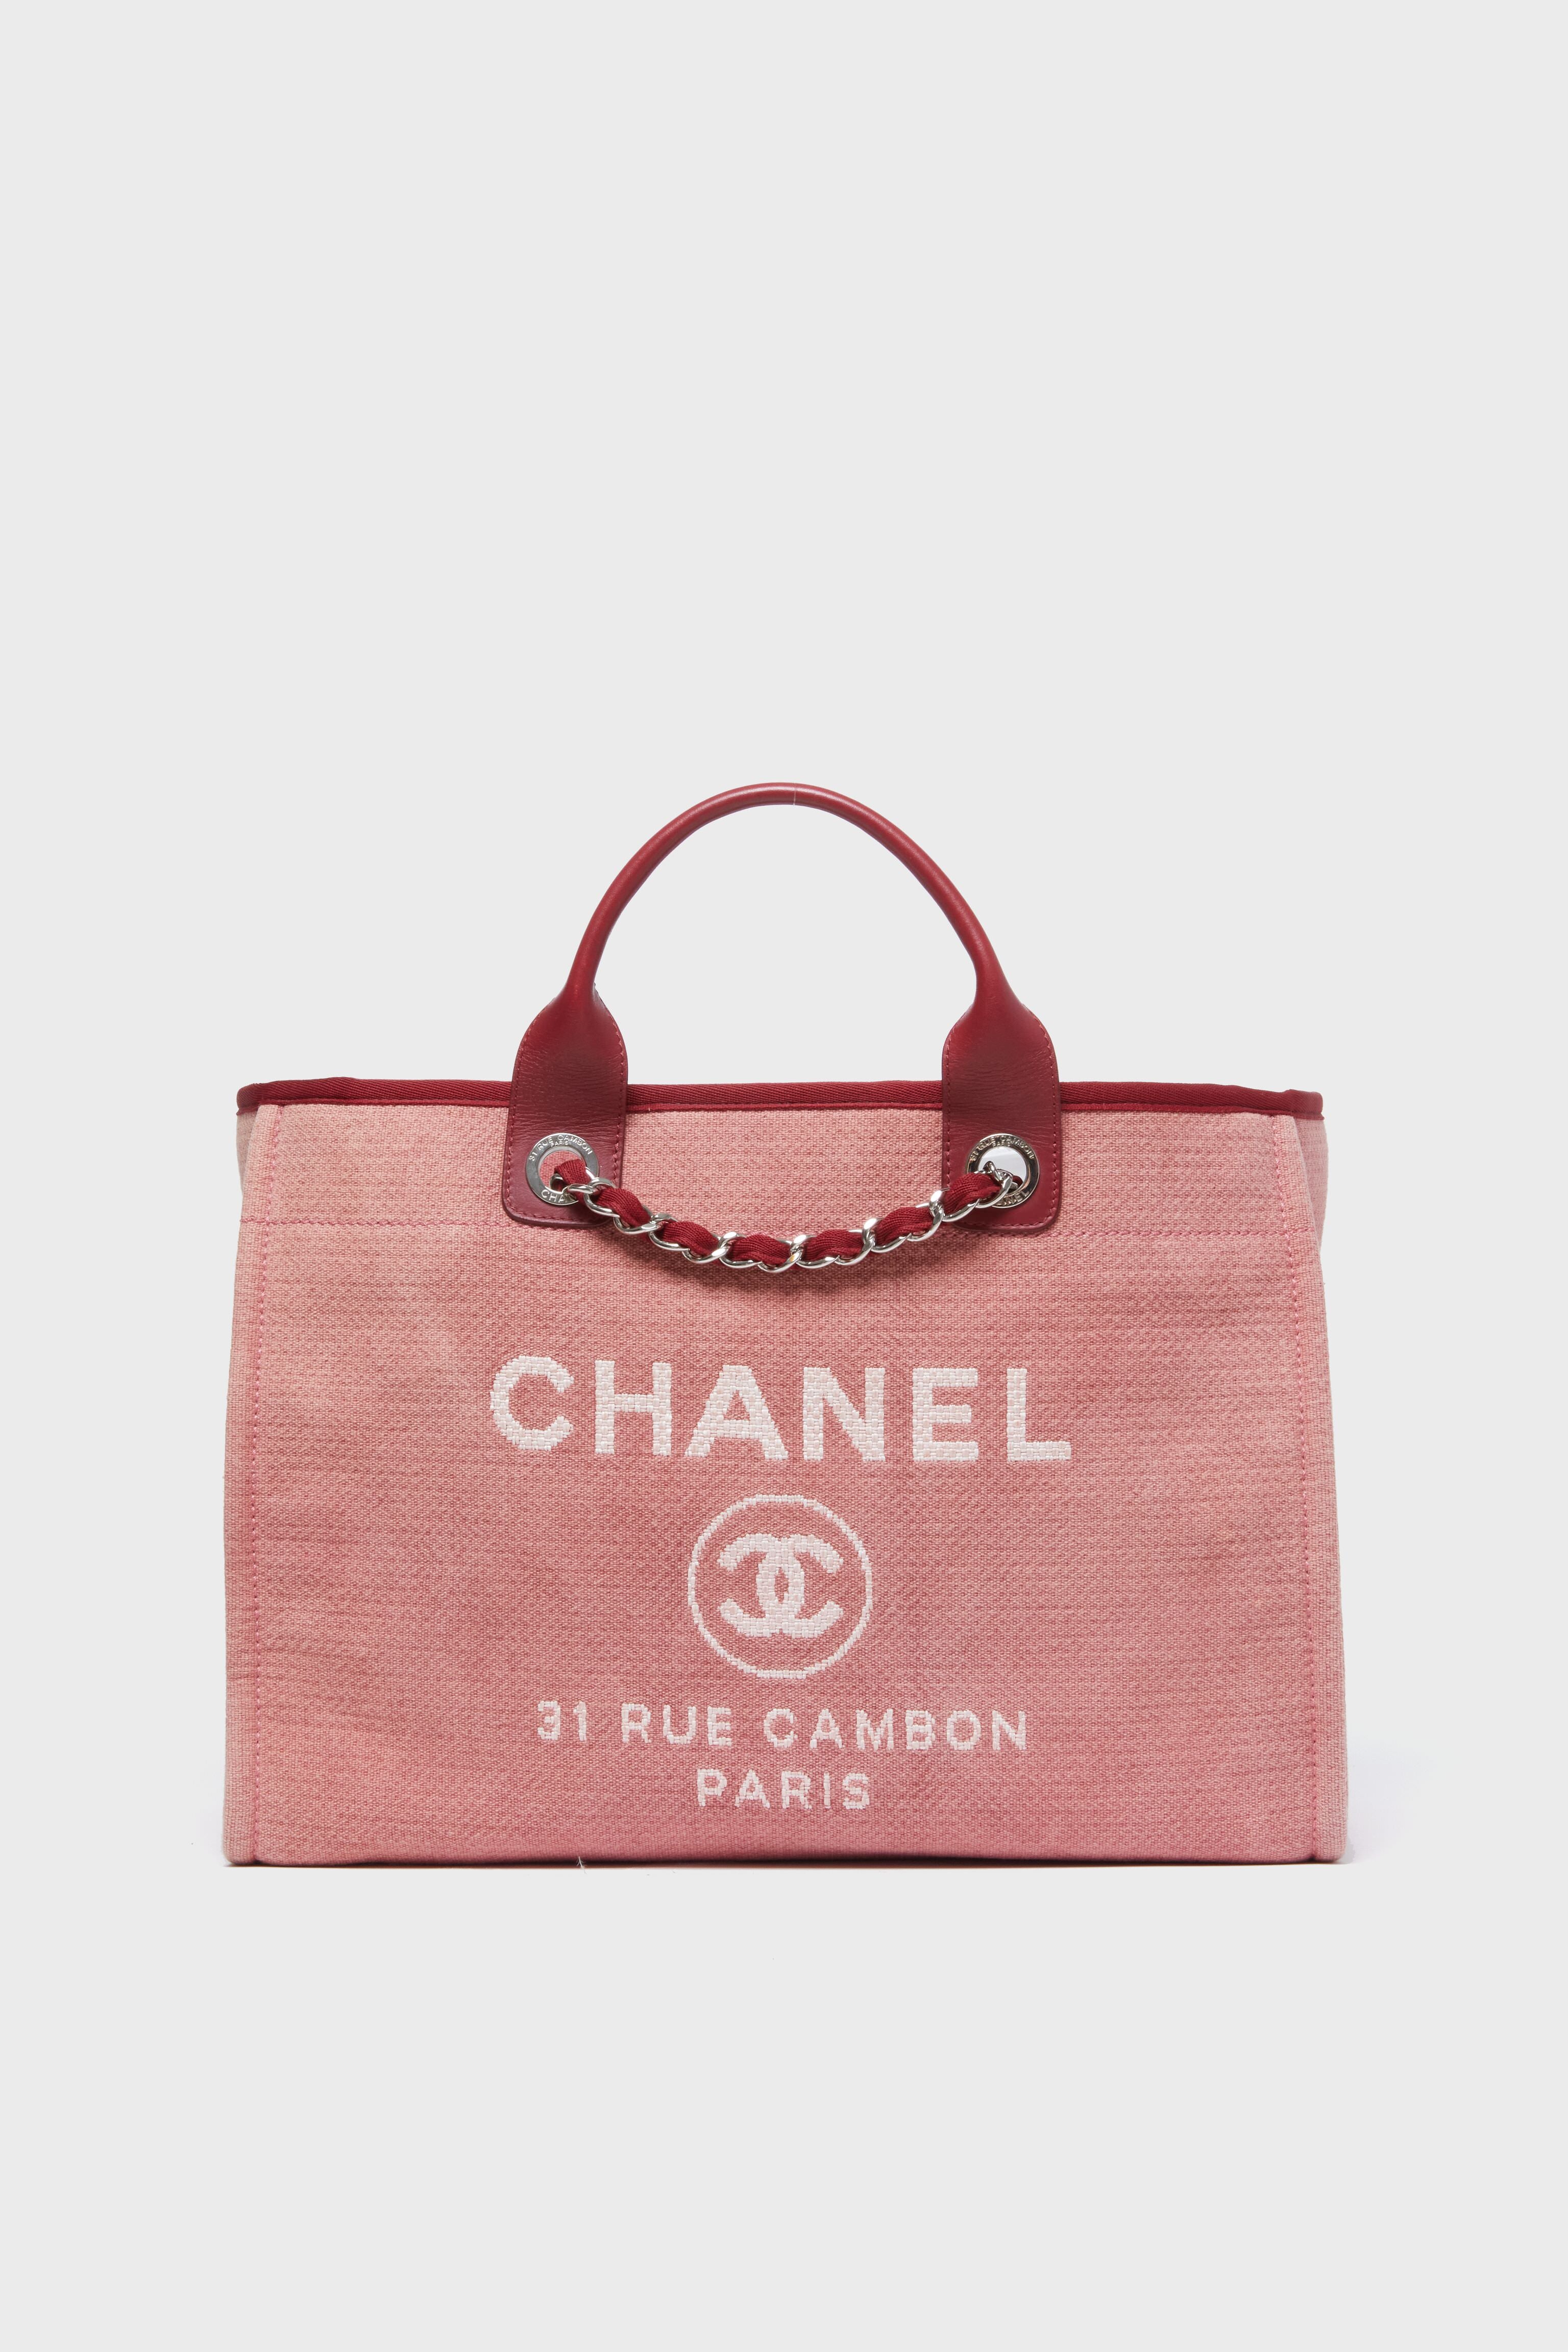 CHANEL Pre-Owned 2012 Deauville Canvas Tote Bag - Farfetch